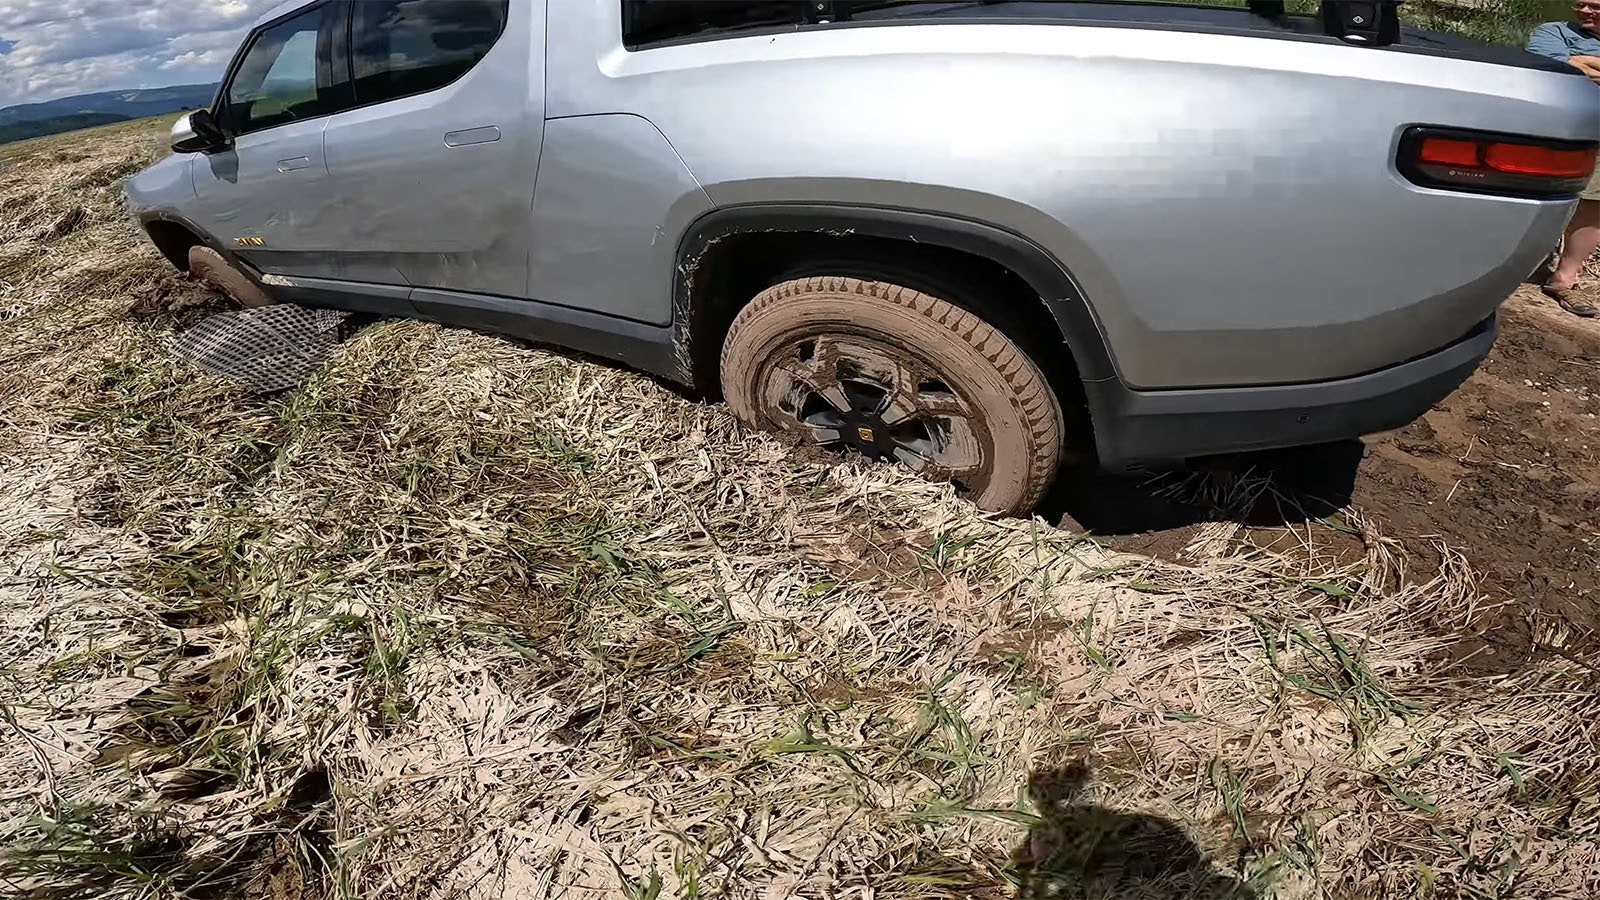 Redneck Rescue responded to pull this Rivian electric vehicle that got itself axel-deep in mud on a Wyoming hot spring.